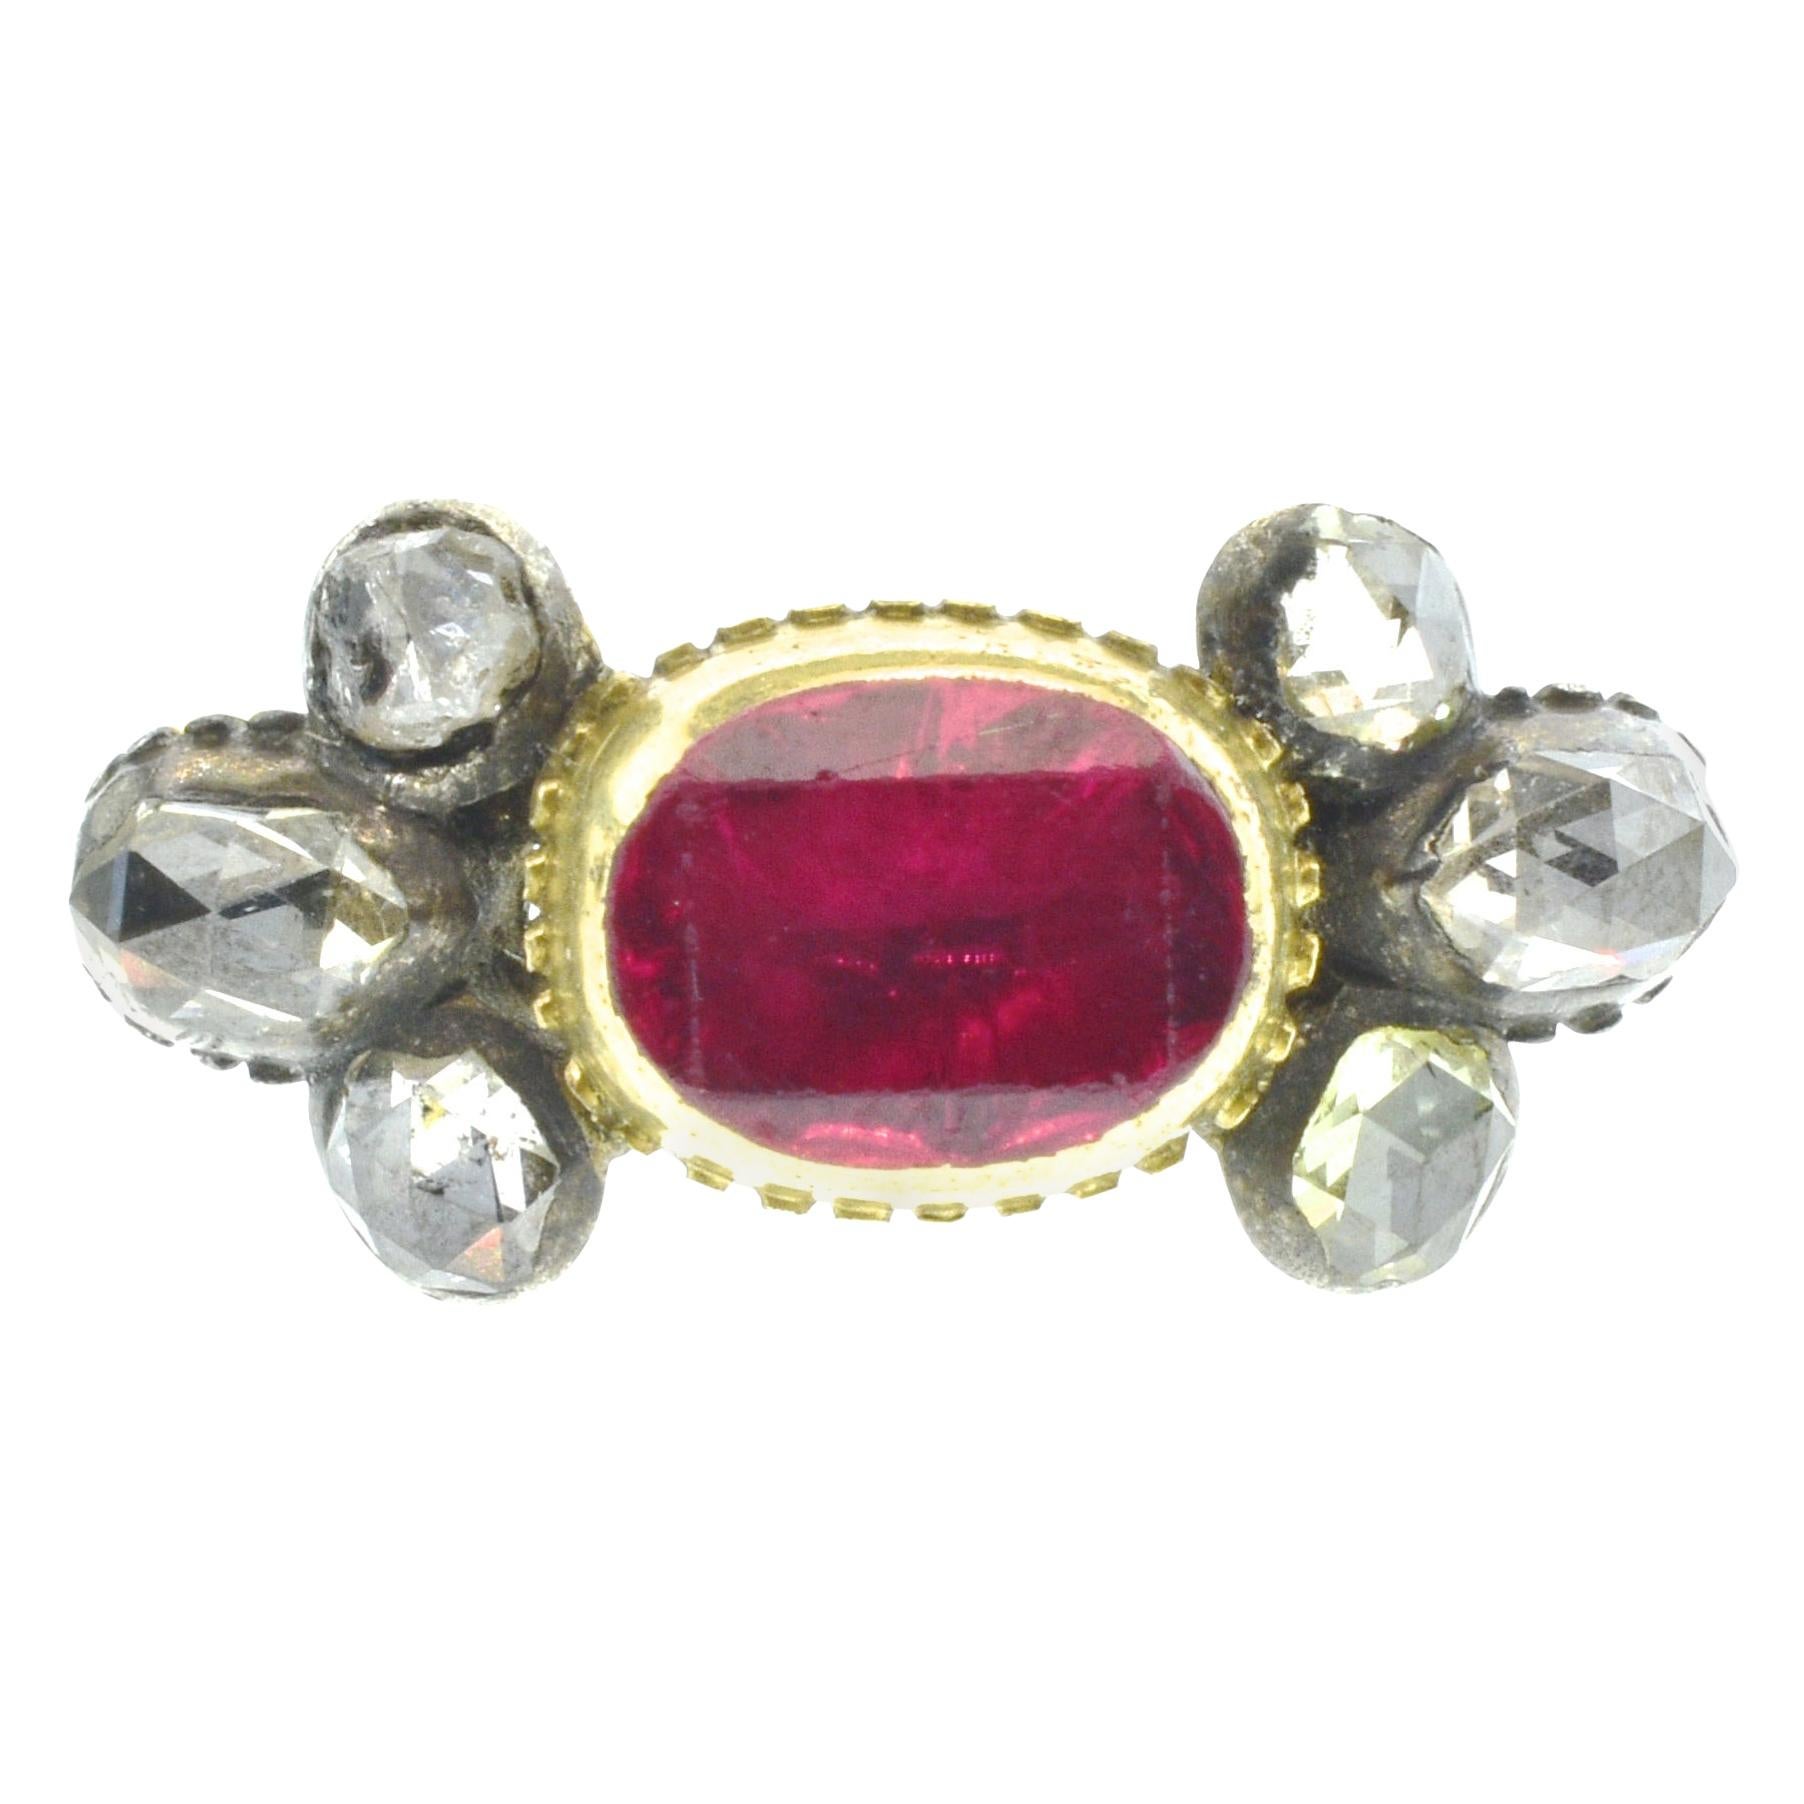 Antique period natural Spinel, diamond and enamel ring. In very good condition,  for its age, this impressive 18th century ring tests to be more than 18K gold (probably 20k), it centers an oval bright red natural Spinel (measuring 8.3 by 6.7 mm), in